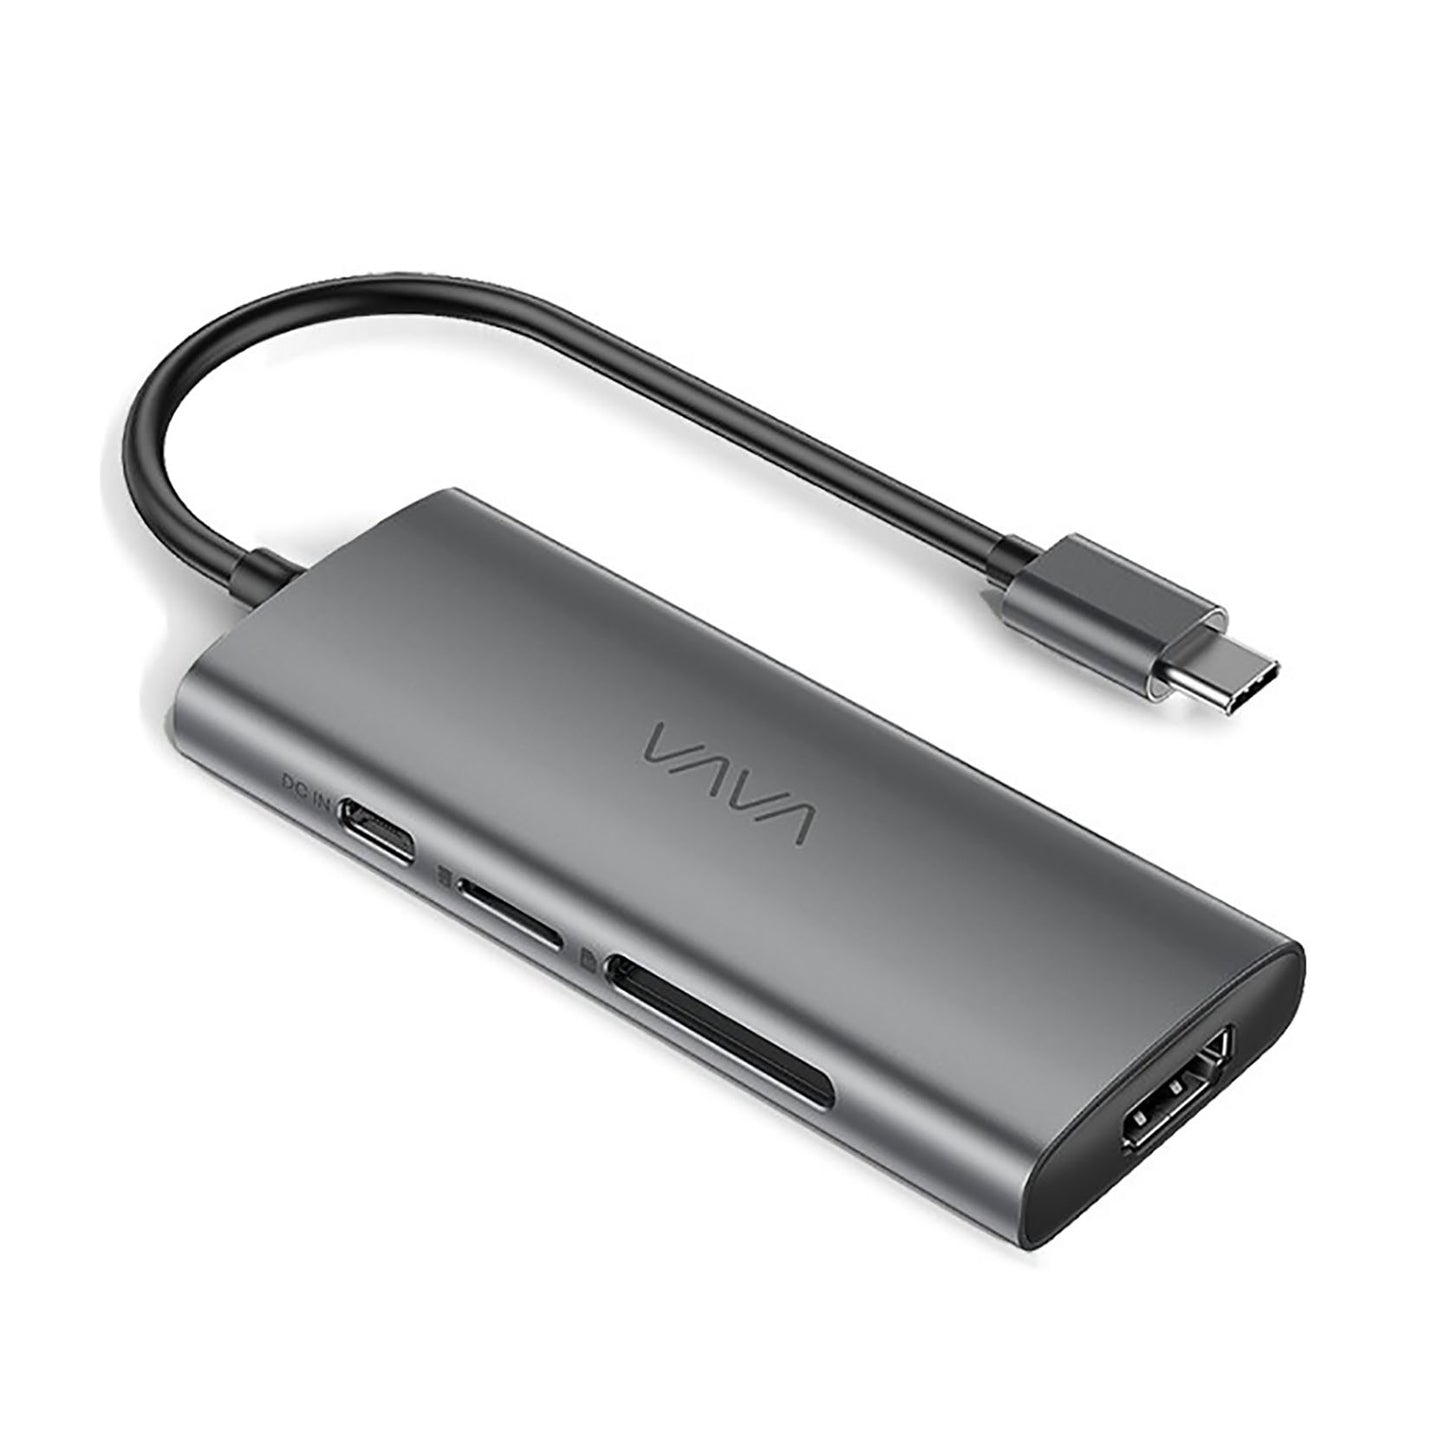 VAVA 7-in-1 USB-C Hub (Ports: 3 USB 3.0, SD Card, TF Card, PD, HDMI) with 100W Charging 4k Video Output VA-UCO17